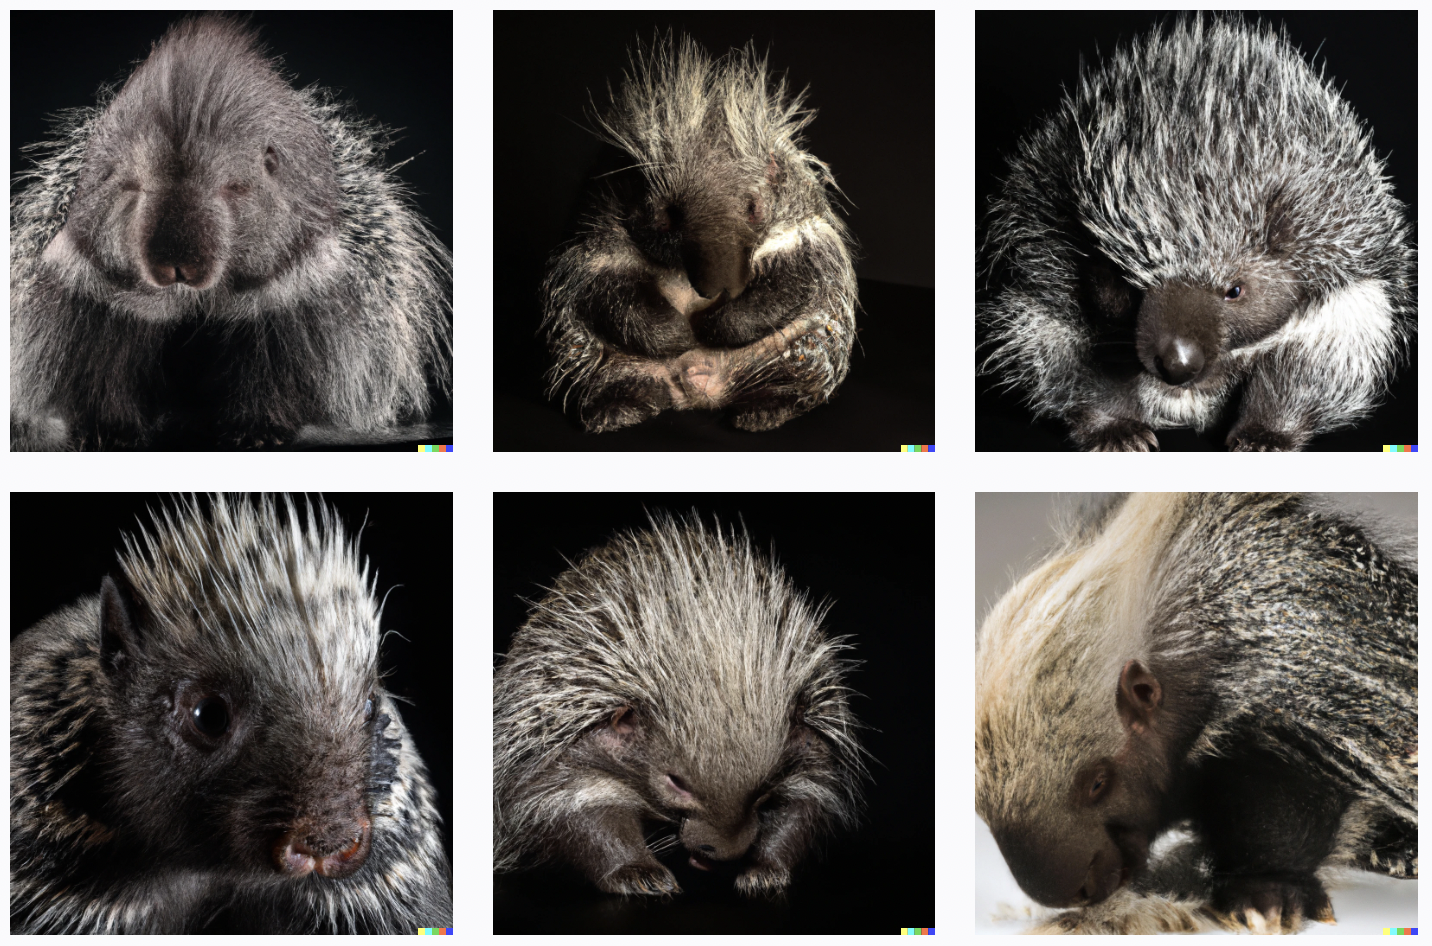 Spiky mammals that resemble American porcupines, including the big nose and long striped quills.